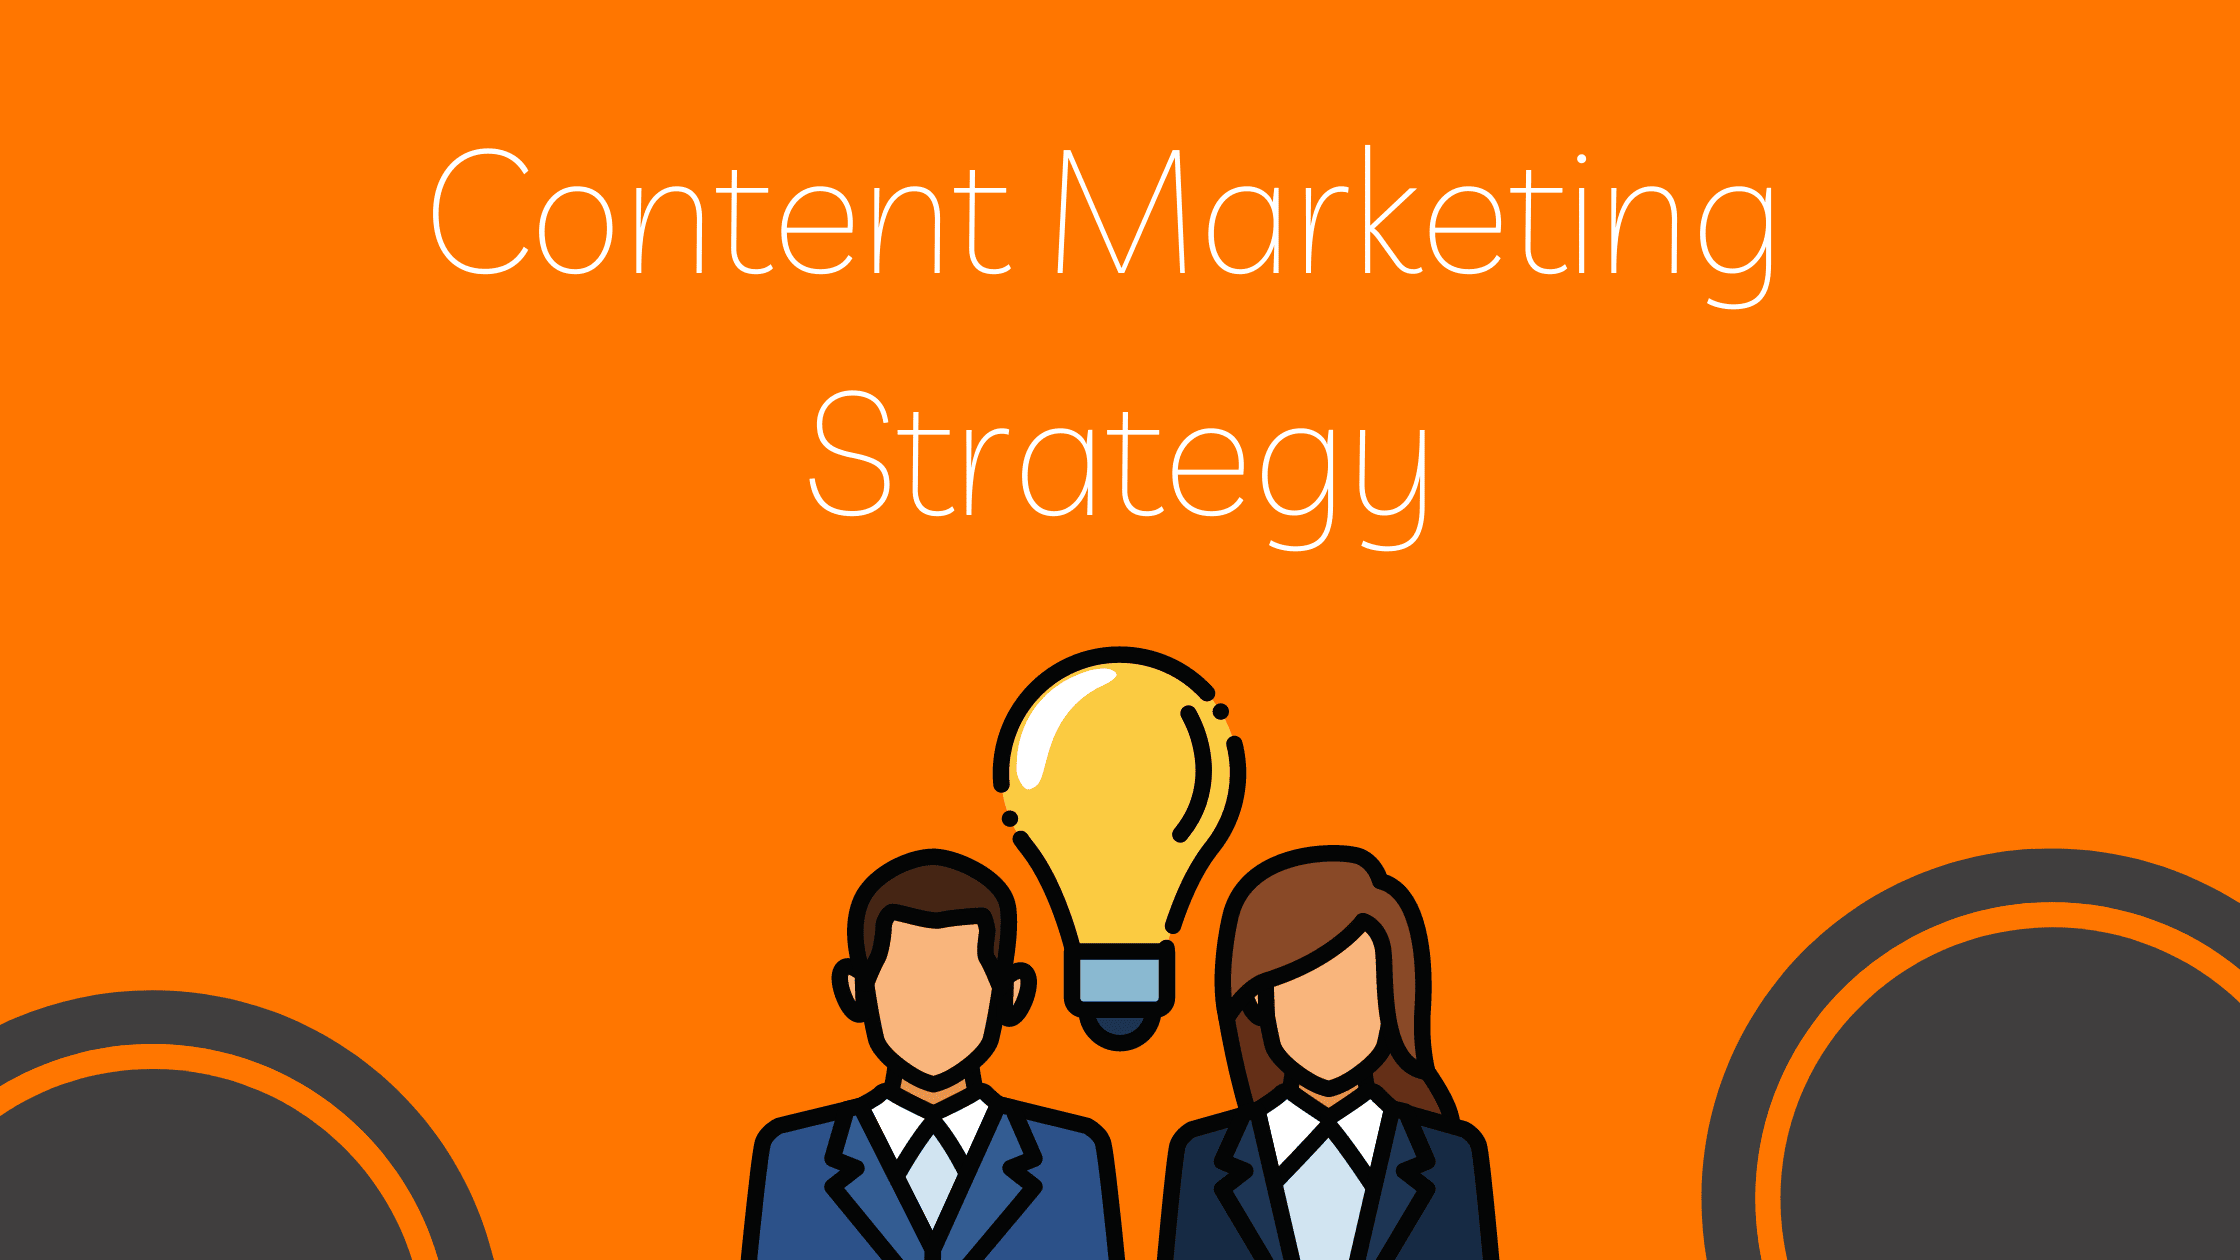 Content Marketing Strategy - Content Creation